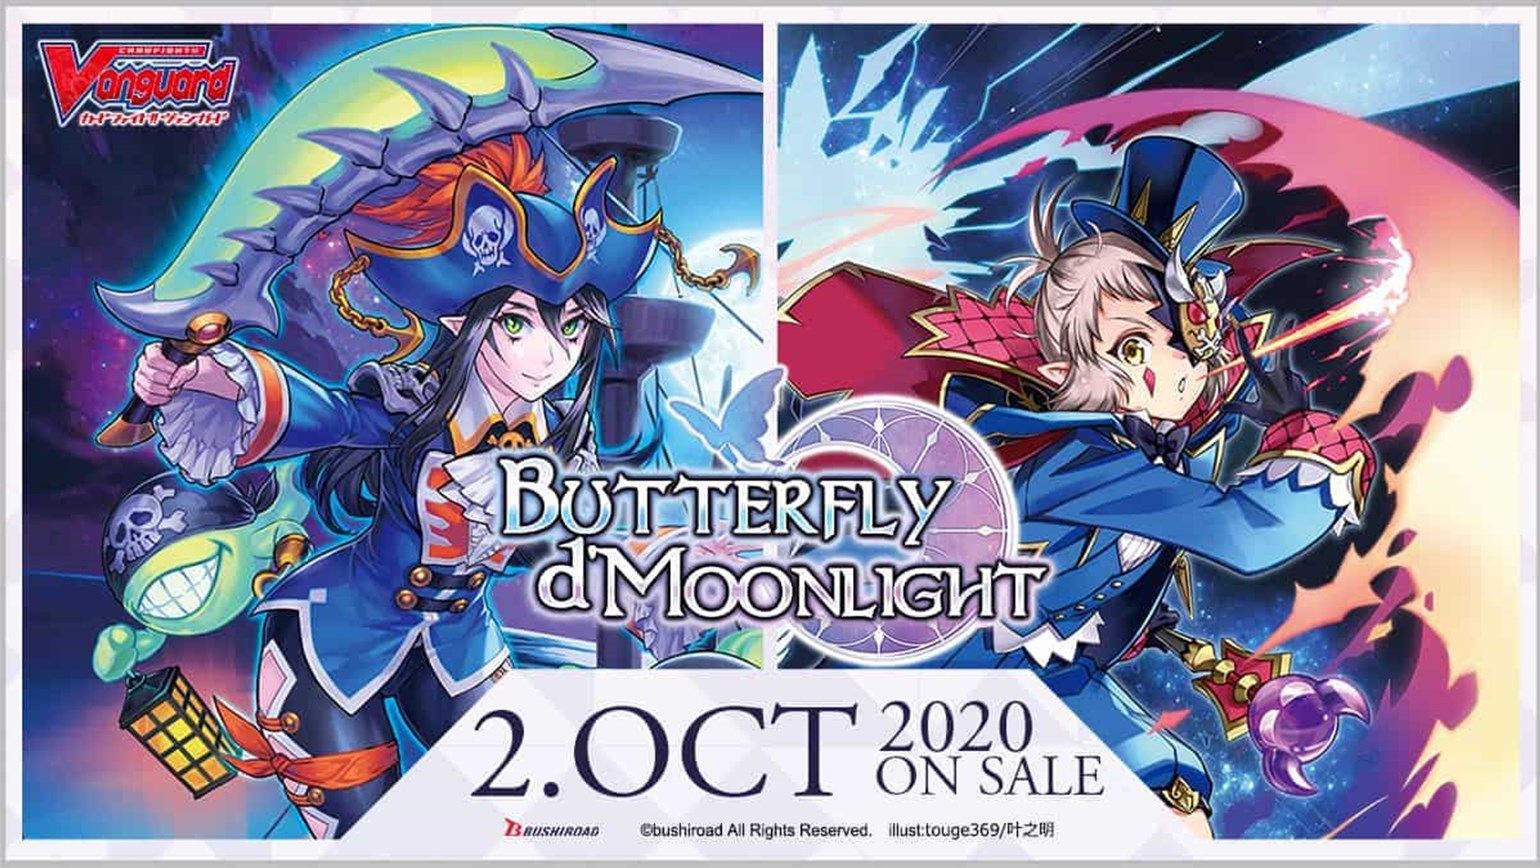 New English Edition Cardfight!! Vanguard Booster Pack Vol. 09: Butterfly d’Moonlight is Coming to Stores on October 2nd!